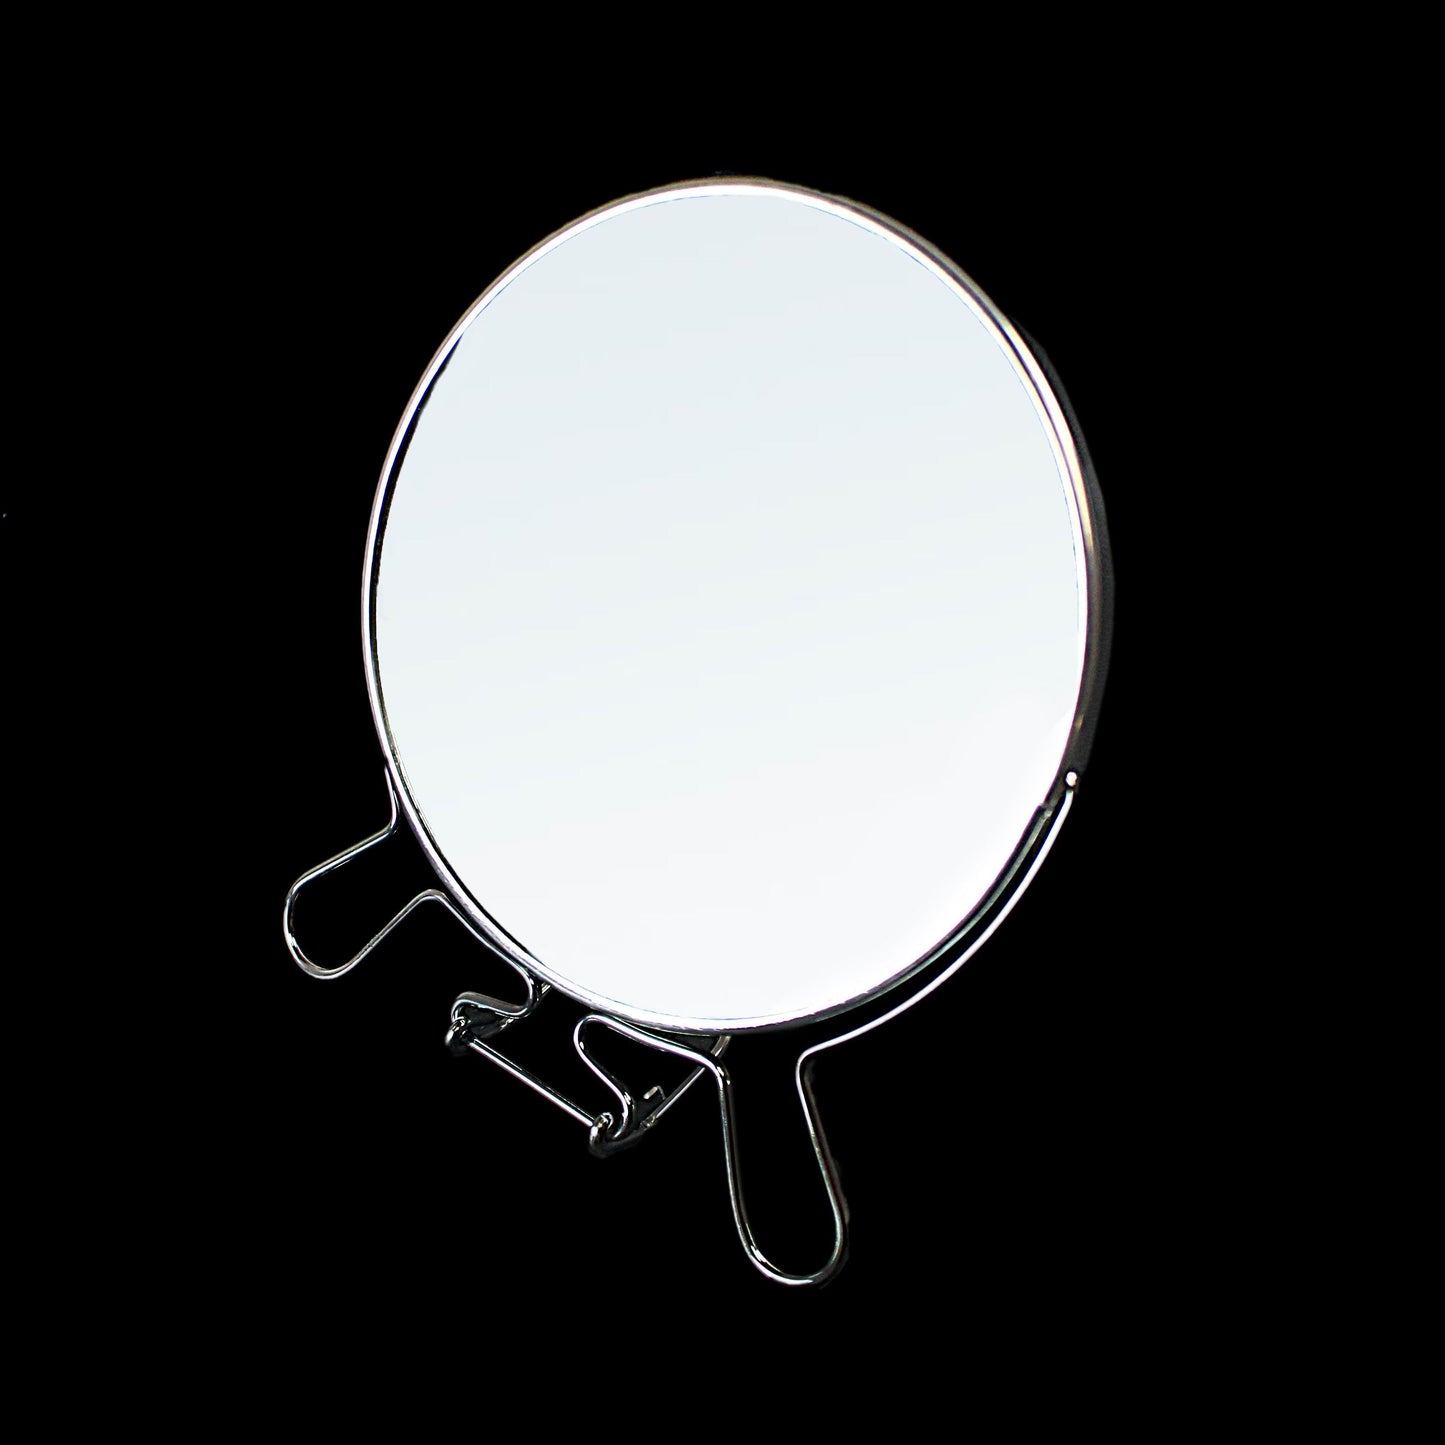 Double Sided Mirror Zoom In Zoom Out Beauty Makeup Desk Mirror With Legs 6'' 2188 (Parcel Rate)